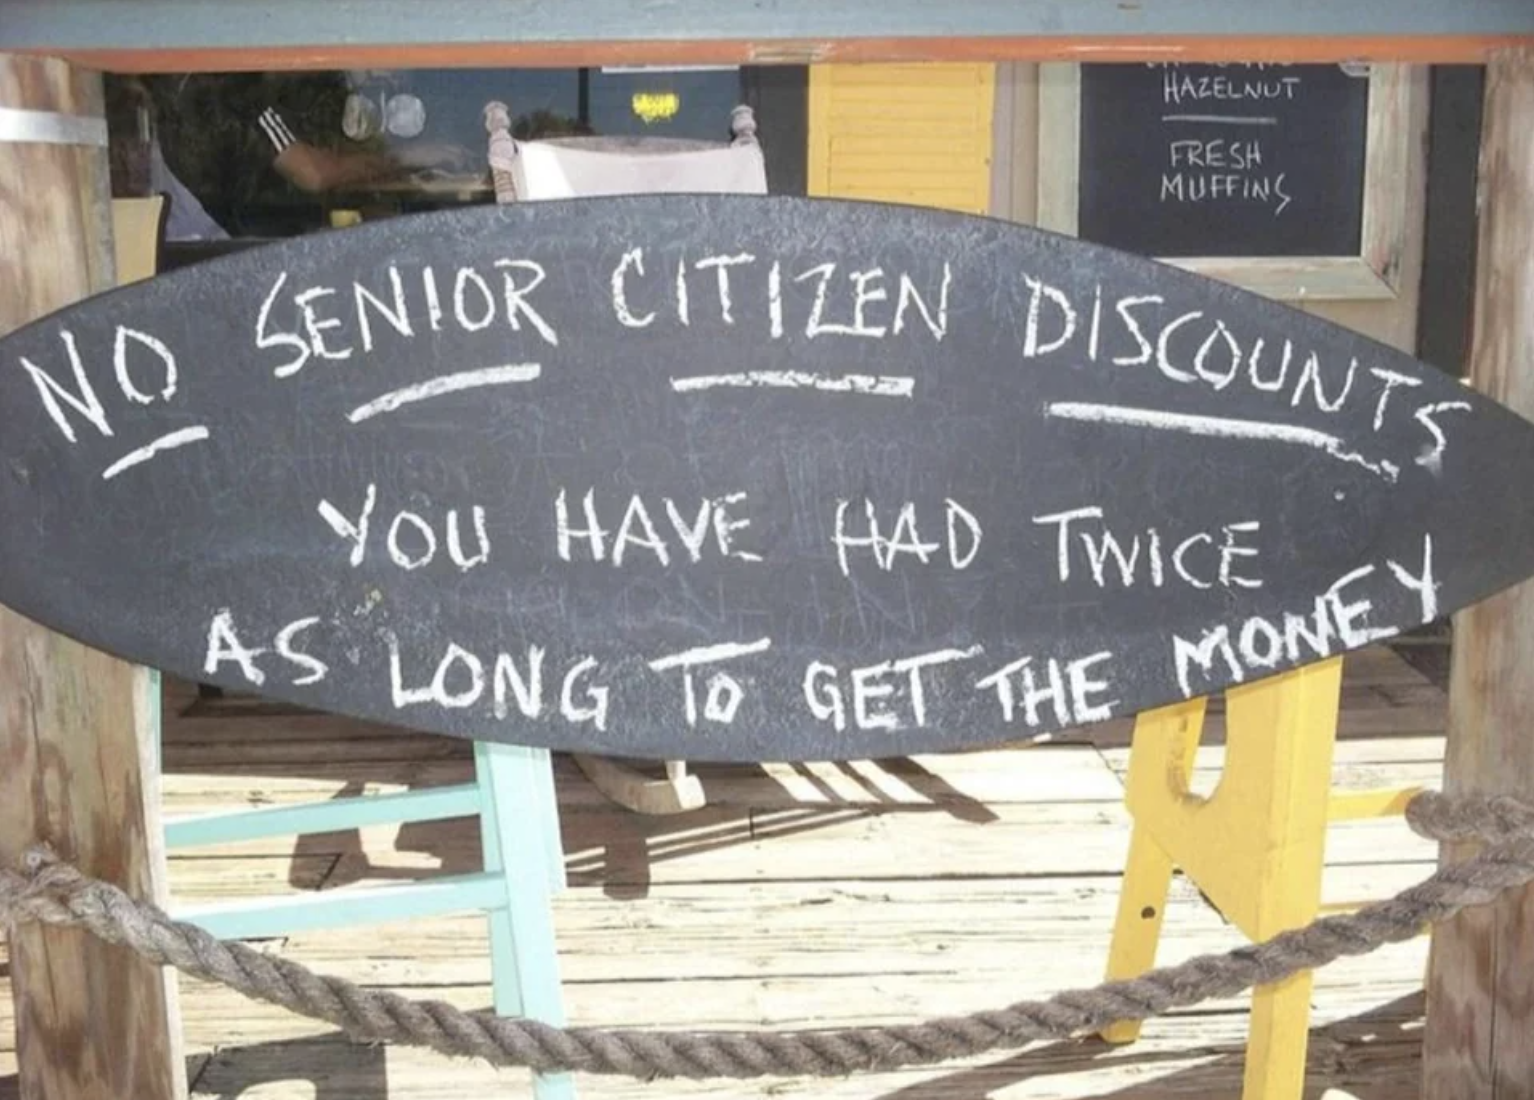 no senior citizen discounts you have had twice as long to get the money